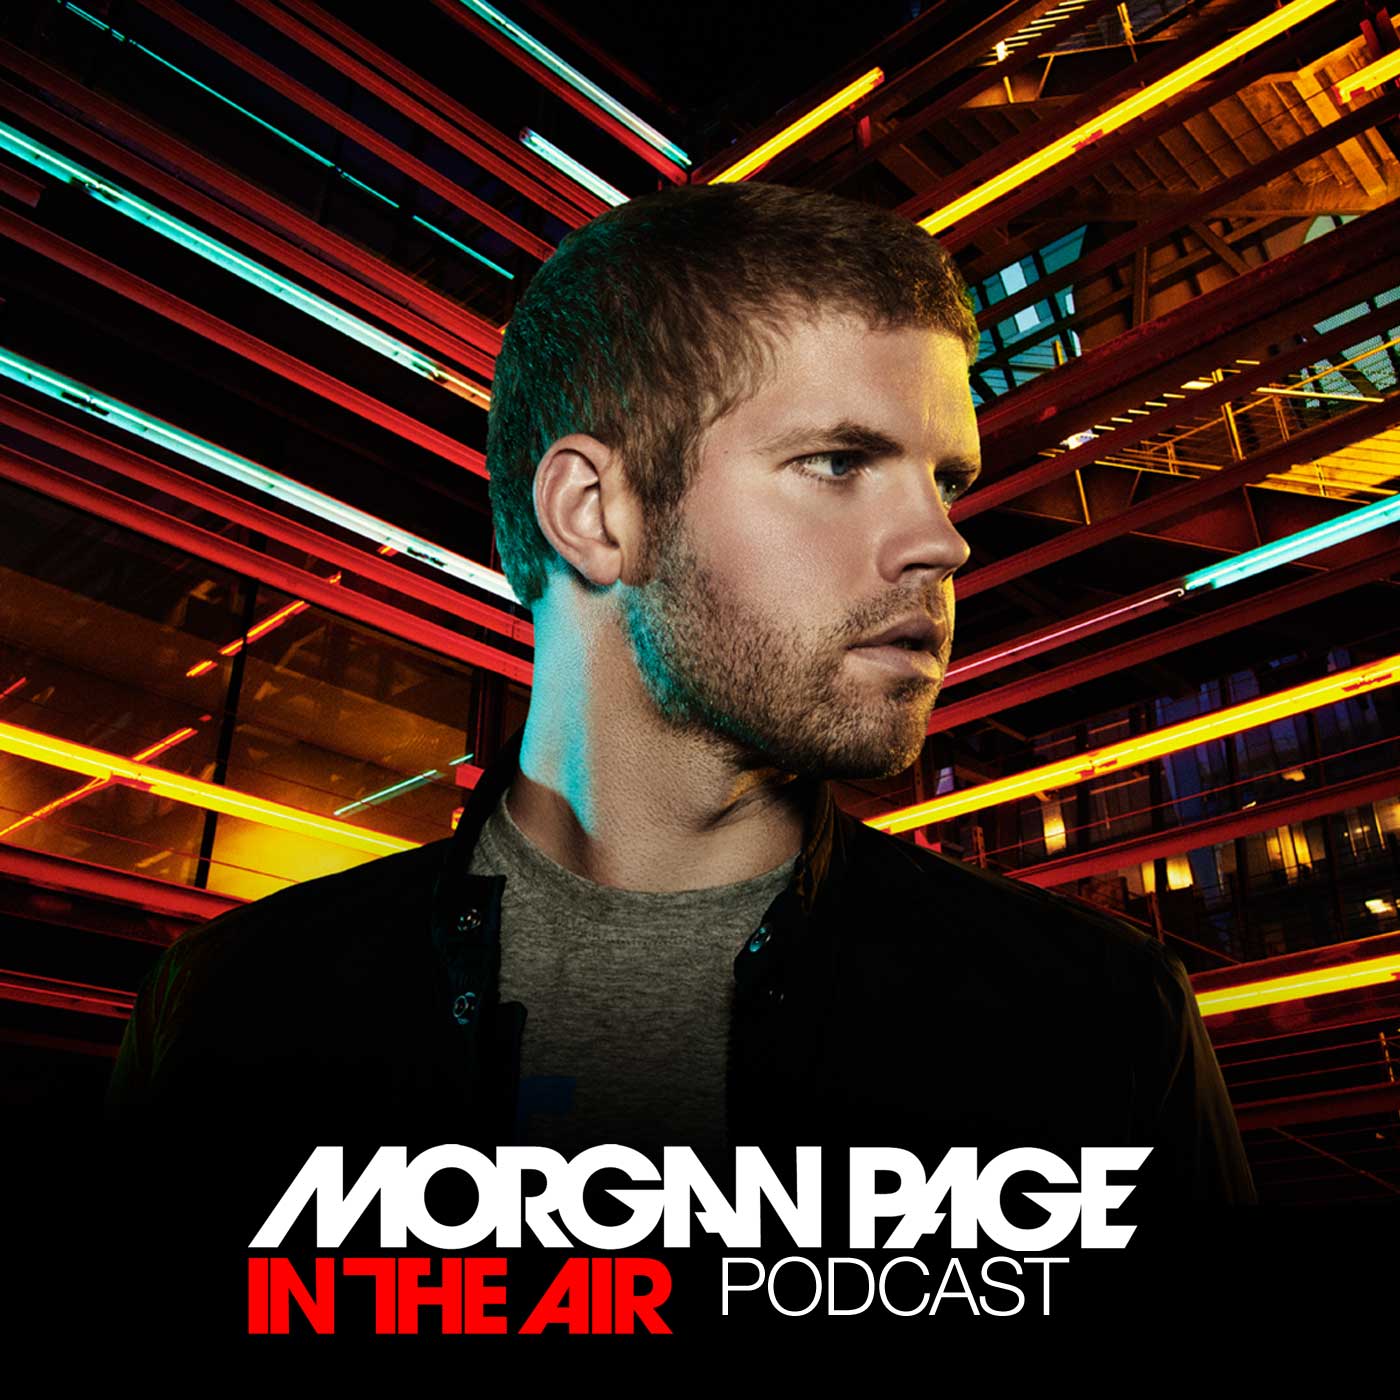 Morgan Page presents 'In The Air', a weekly podcast that features the greatest and newest in dance.